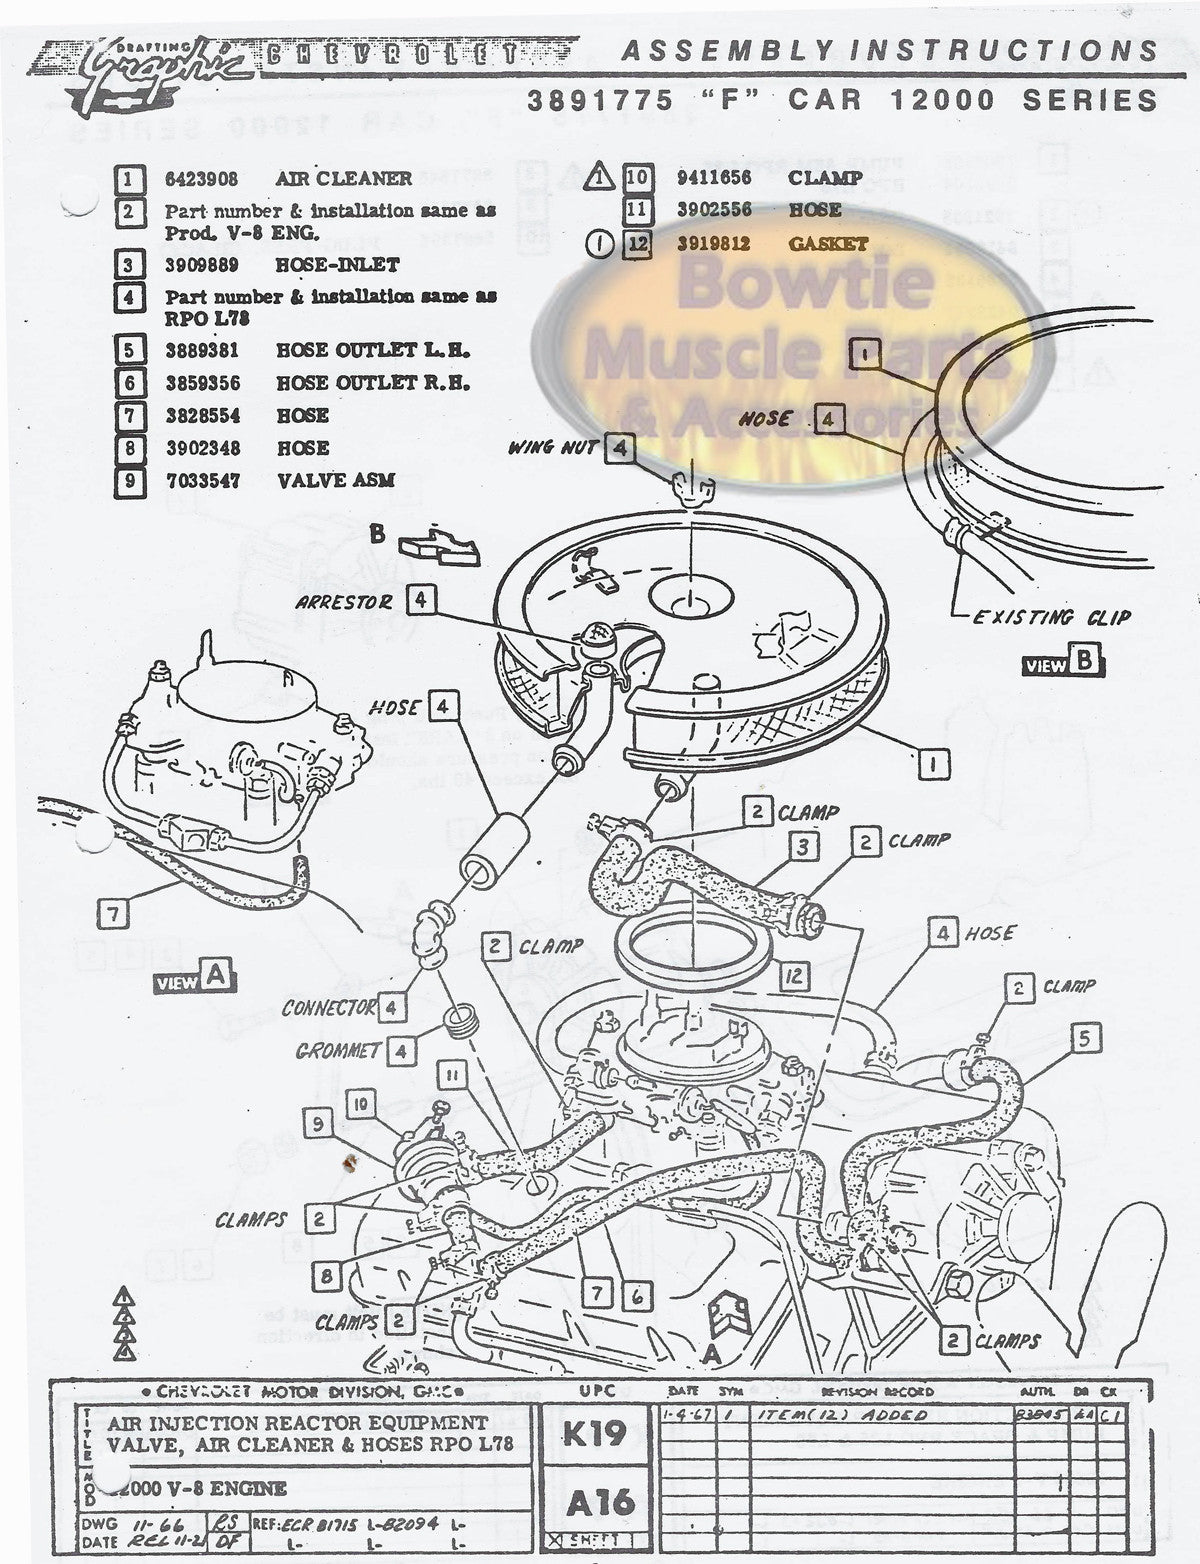 1969 69 Camaro Factory Assembly Manual Z28 SS RS - 488 ... 1969 nova ss wiring diagram further camaro console 